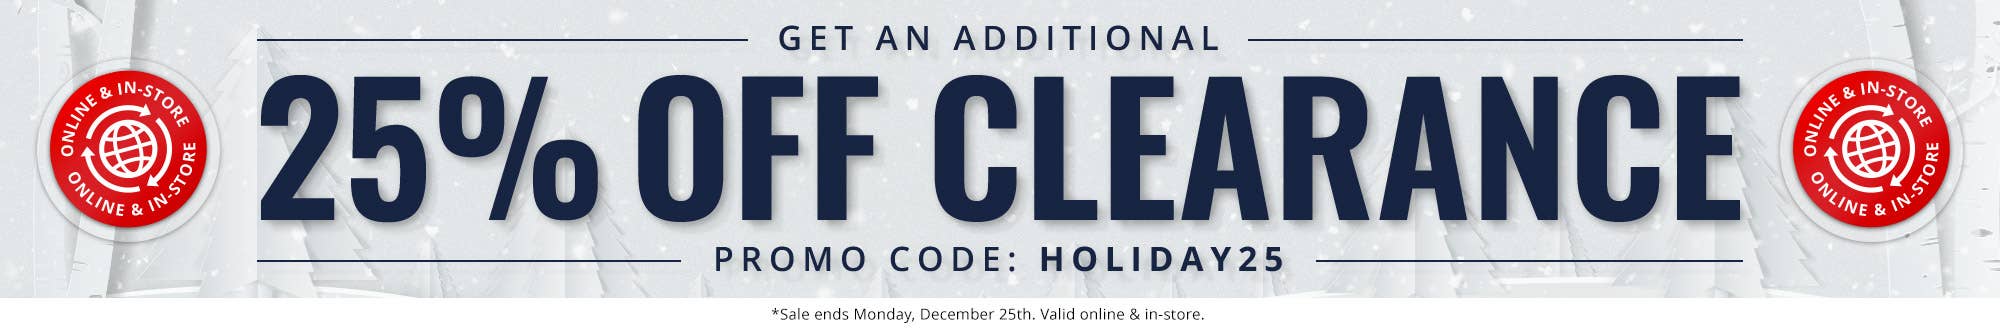 Holiday Savings: 25% off clearance